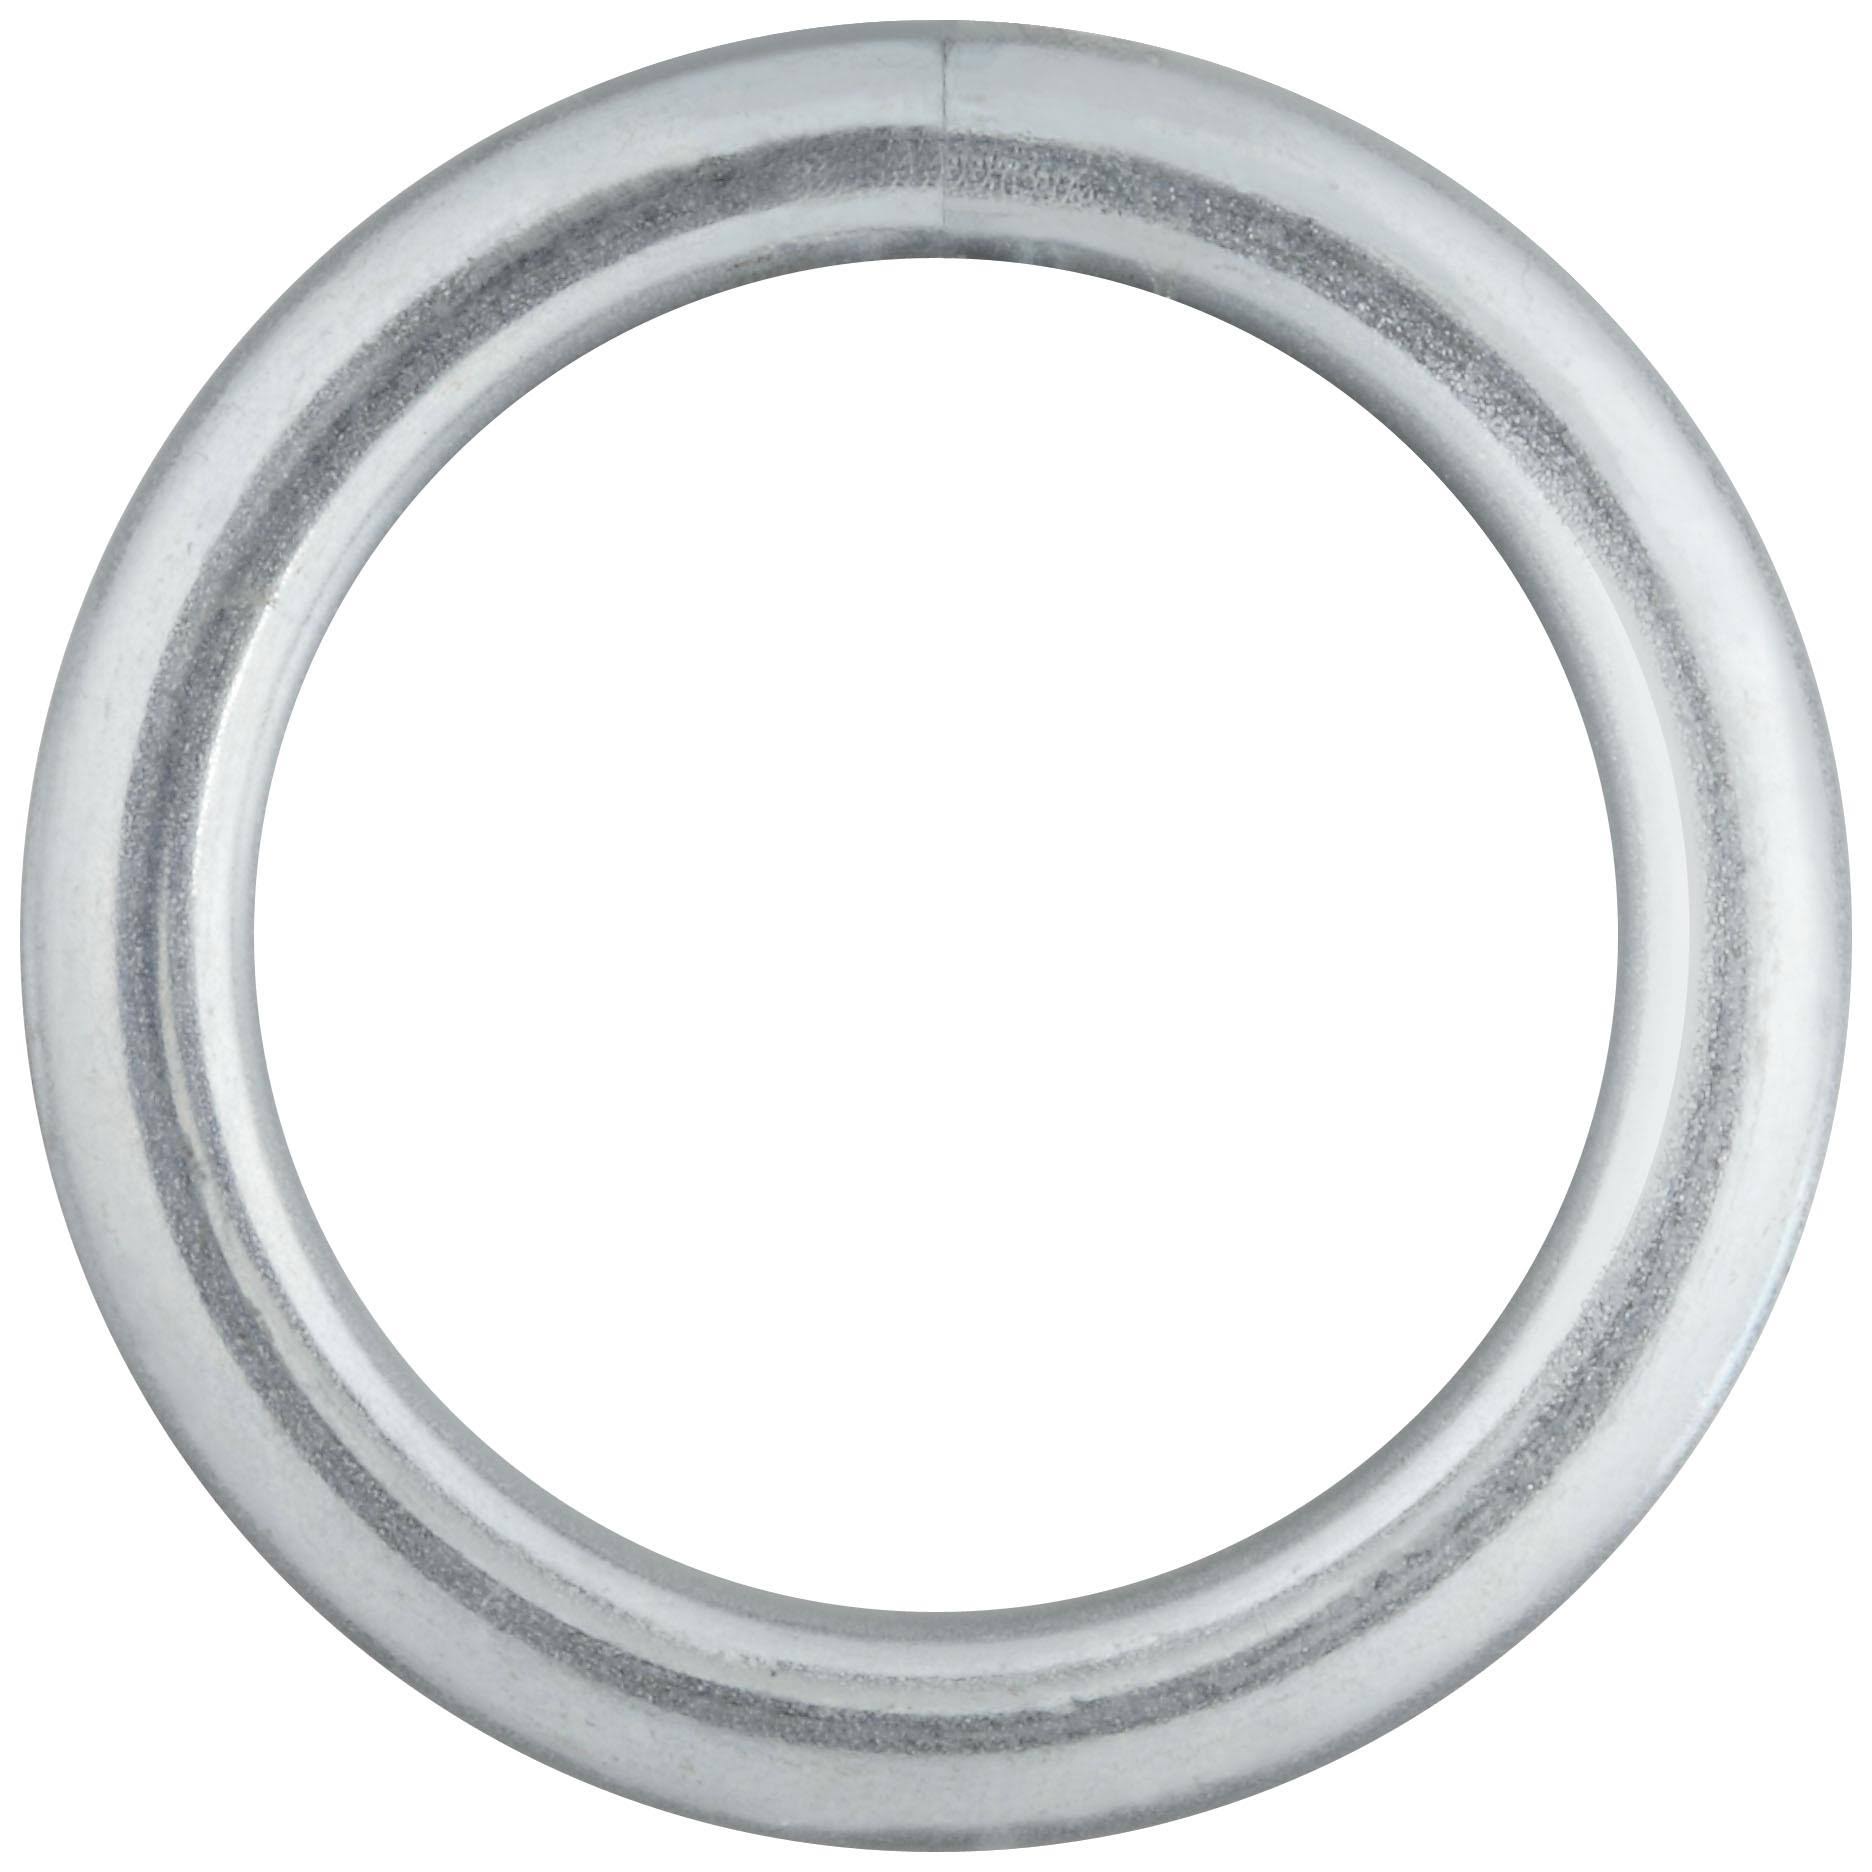 Stanley National Hardware 3155BC Zinc Plated Ring - #4 x 1 1/4"